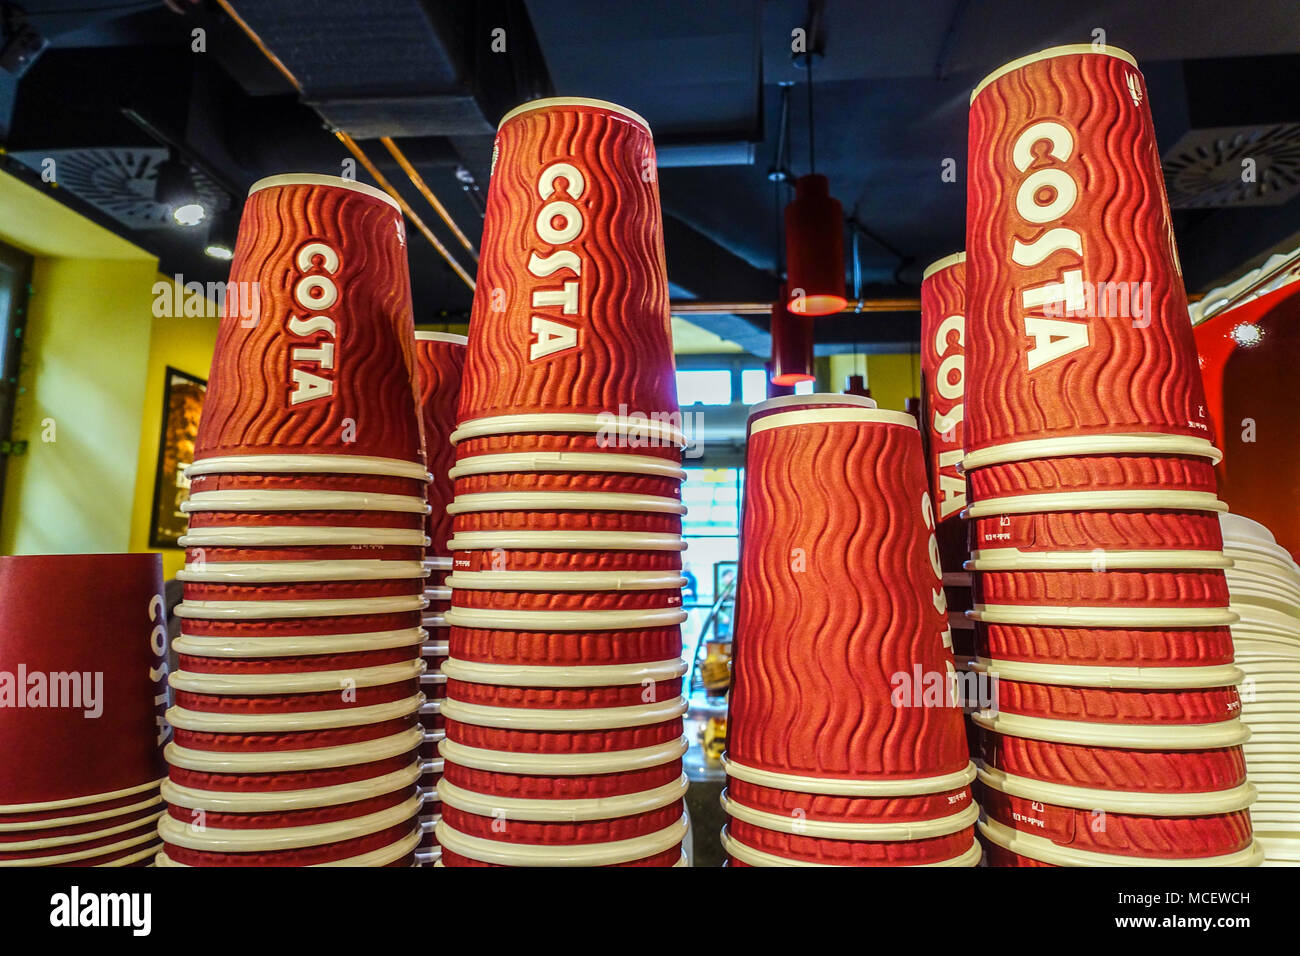 Costa coffee piles of paper cups Stock Photo